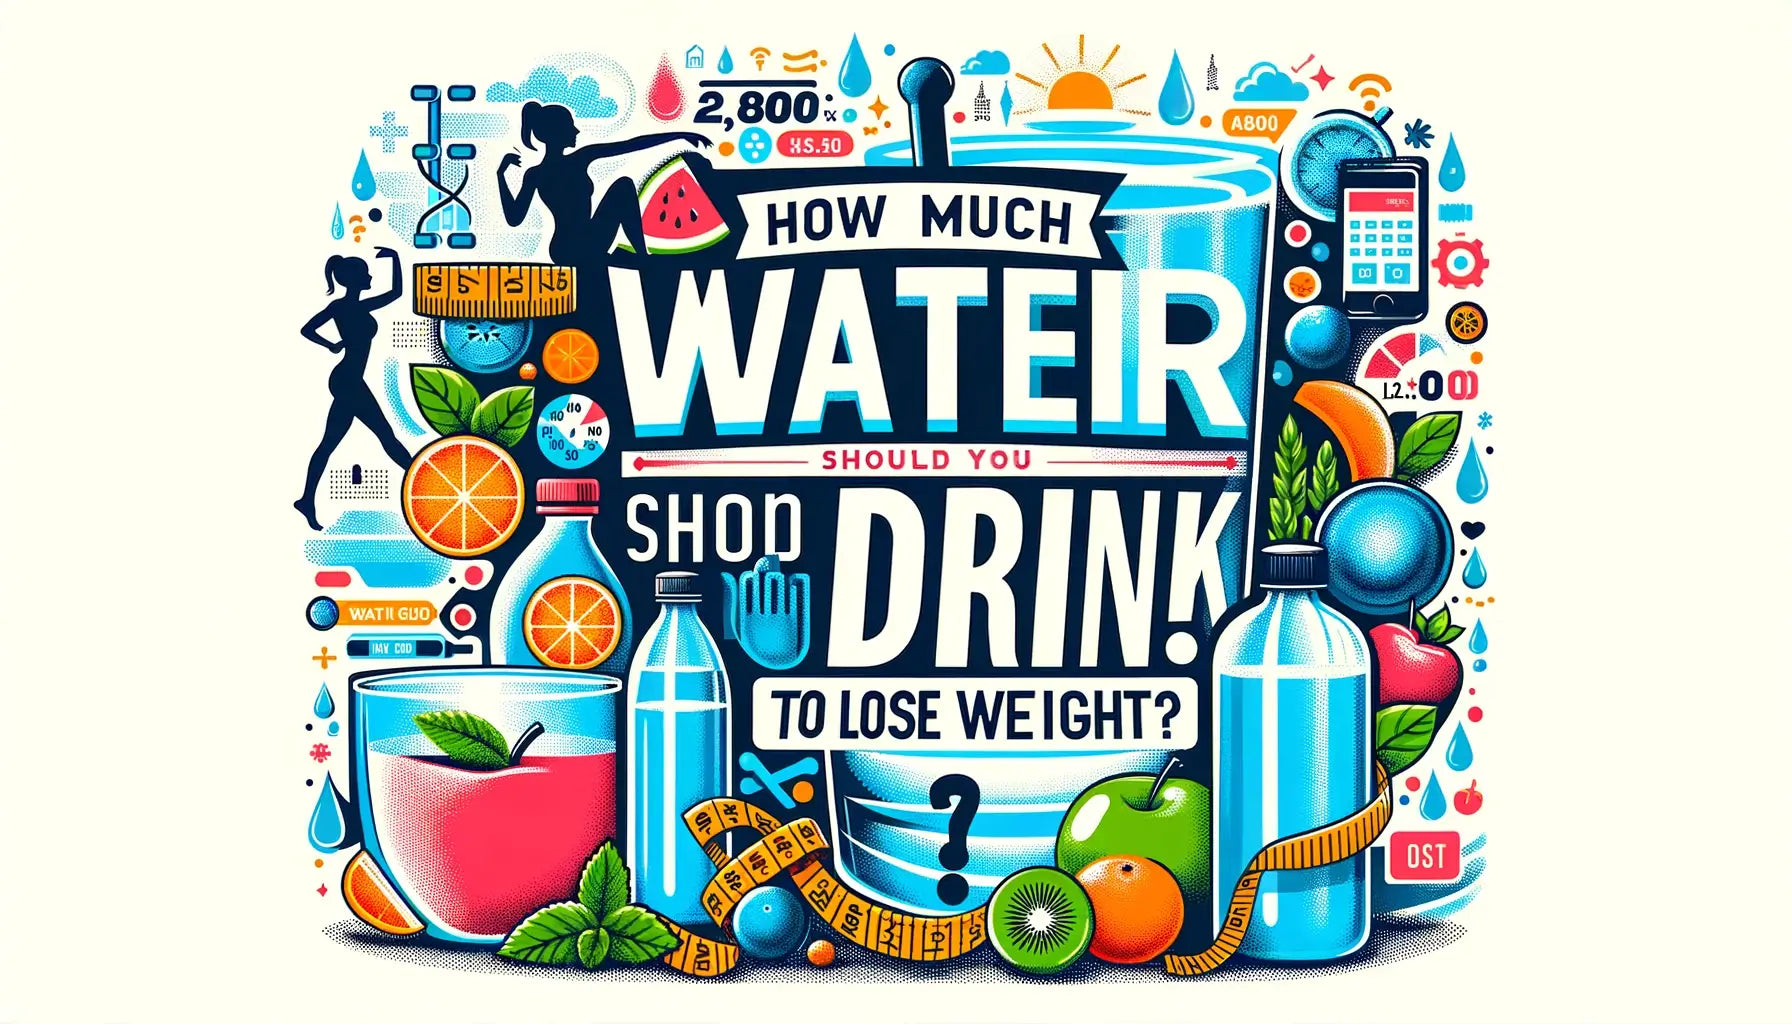 How Much Water Should You Drink to Lose Weight